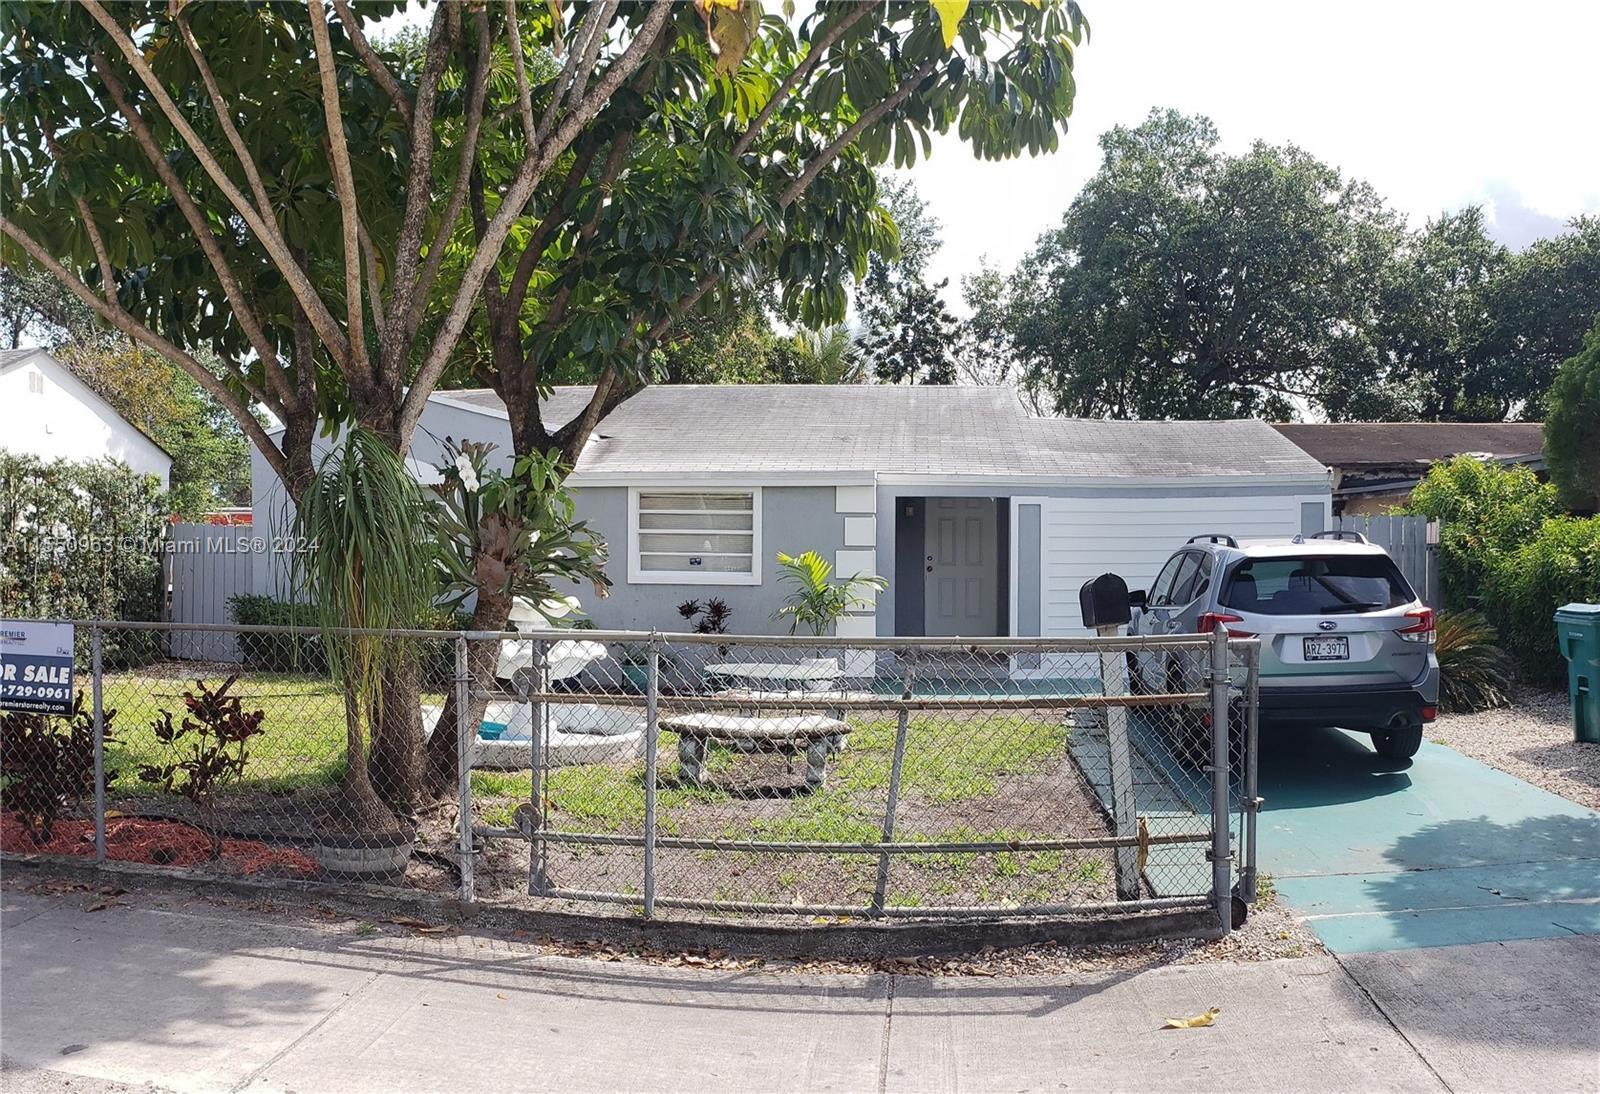 Photo of 2422 NW 87th St in Miami, FL